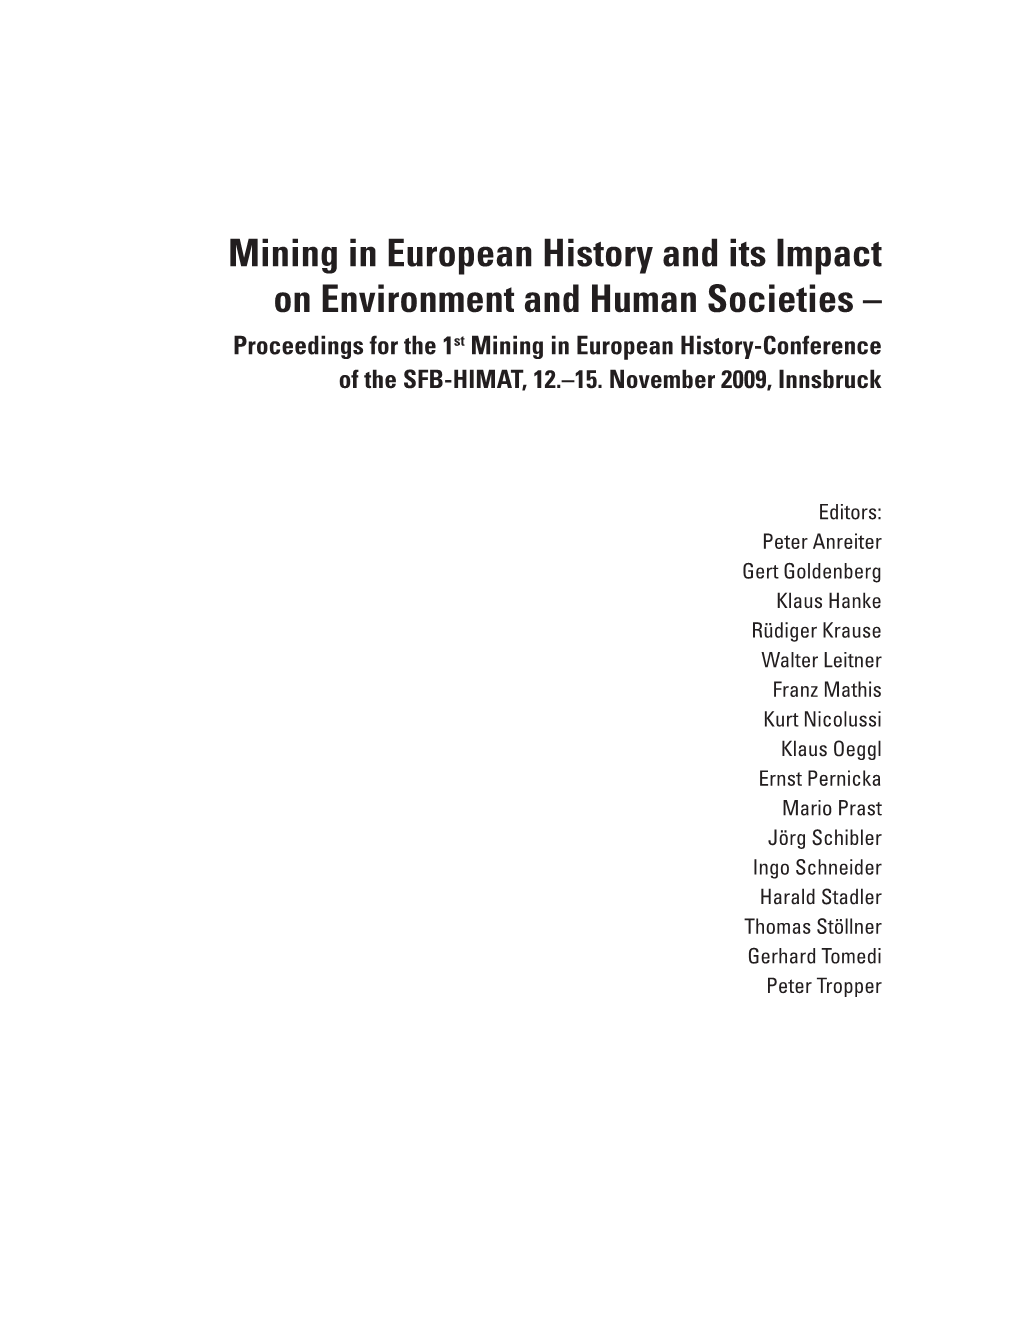 Mining in European History and Its Impact on Environment and Human Societies – Proceedings for the 1St Mining in European History-Conference of the SFB-HIMAT, 12.–15